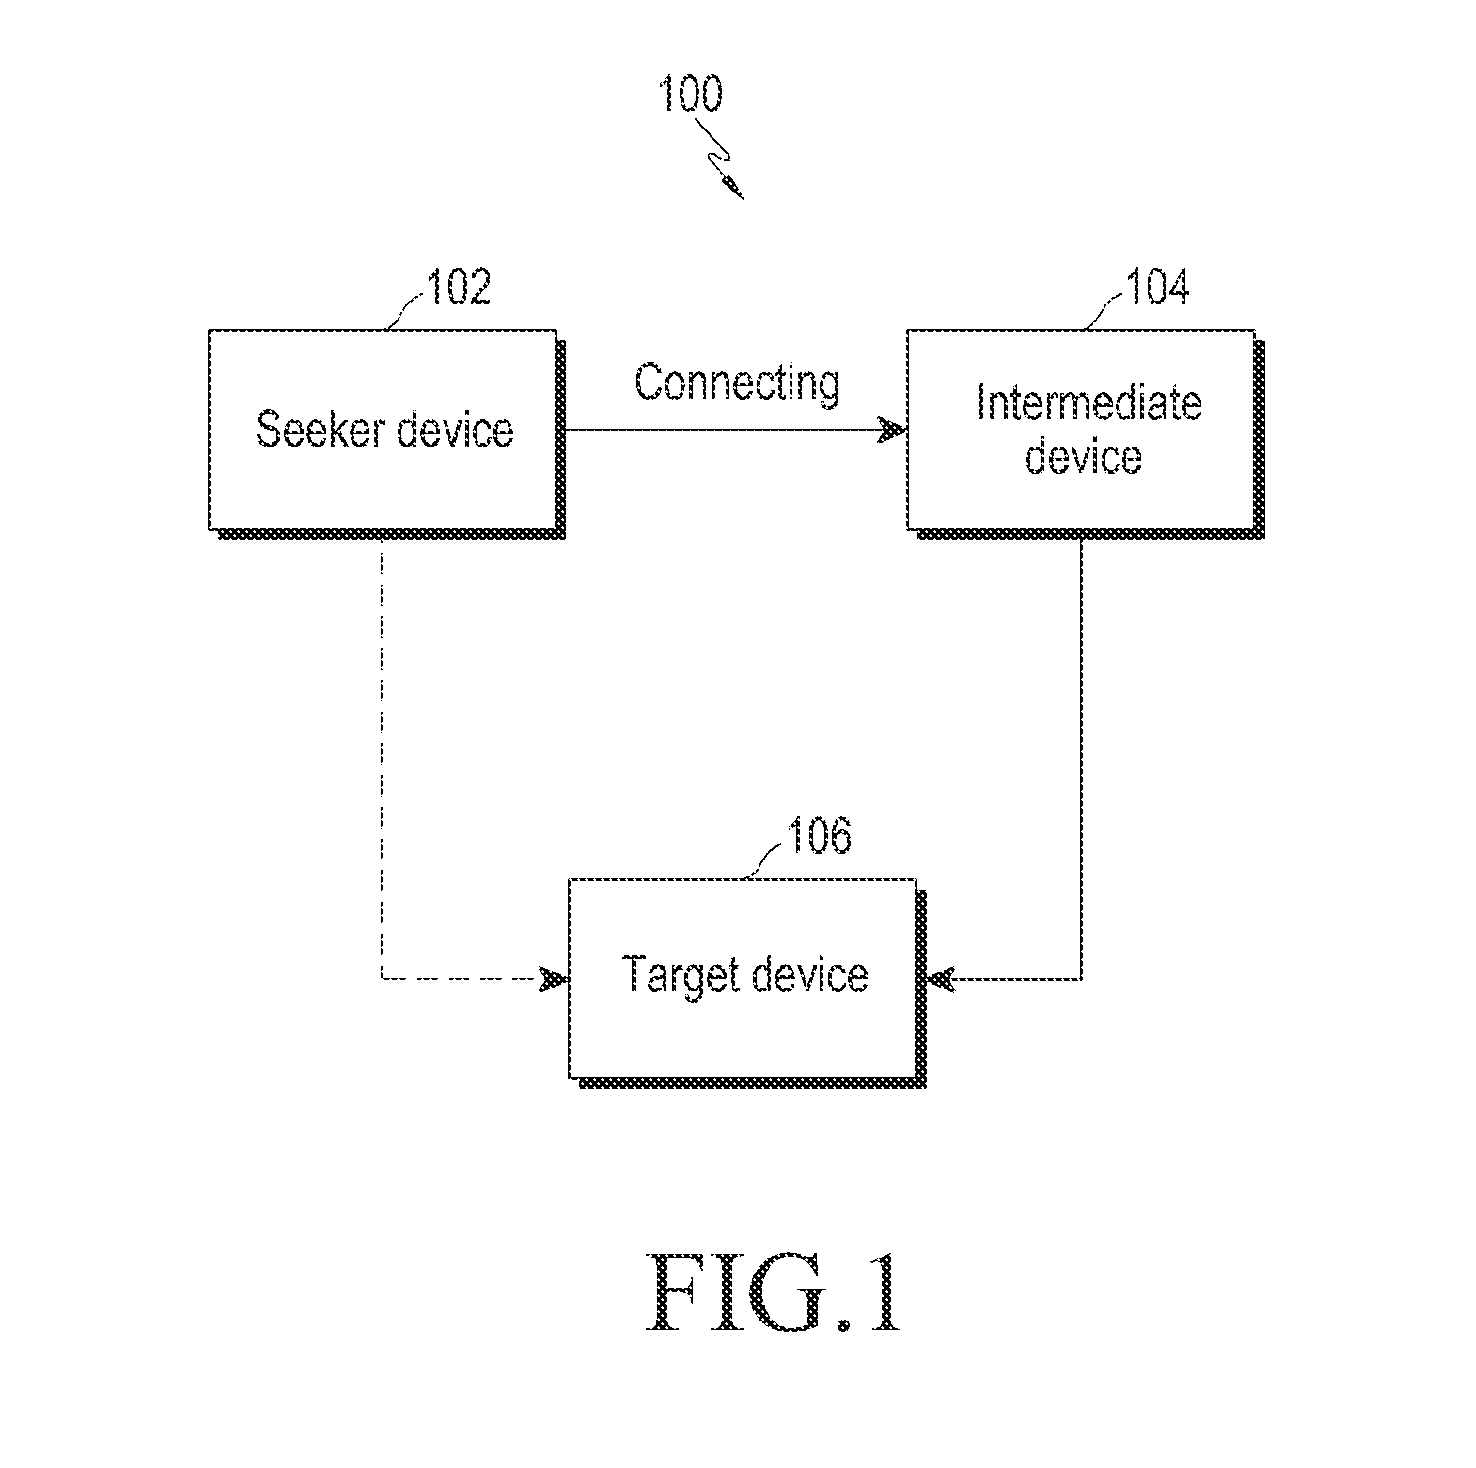 Method and system for establishing a connection between a seeker device and a target device